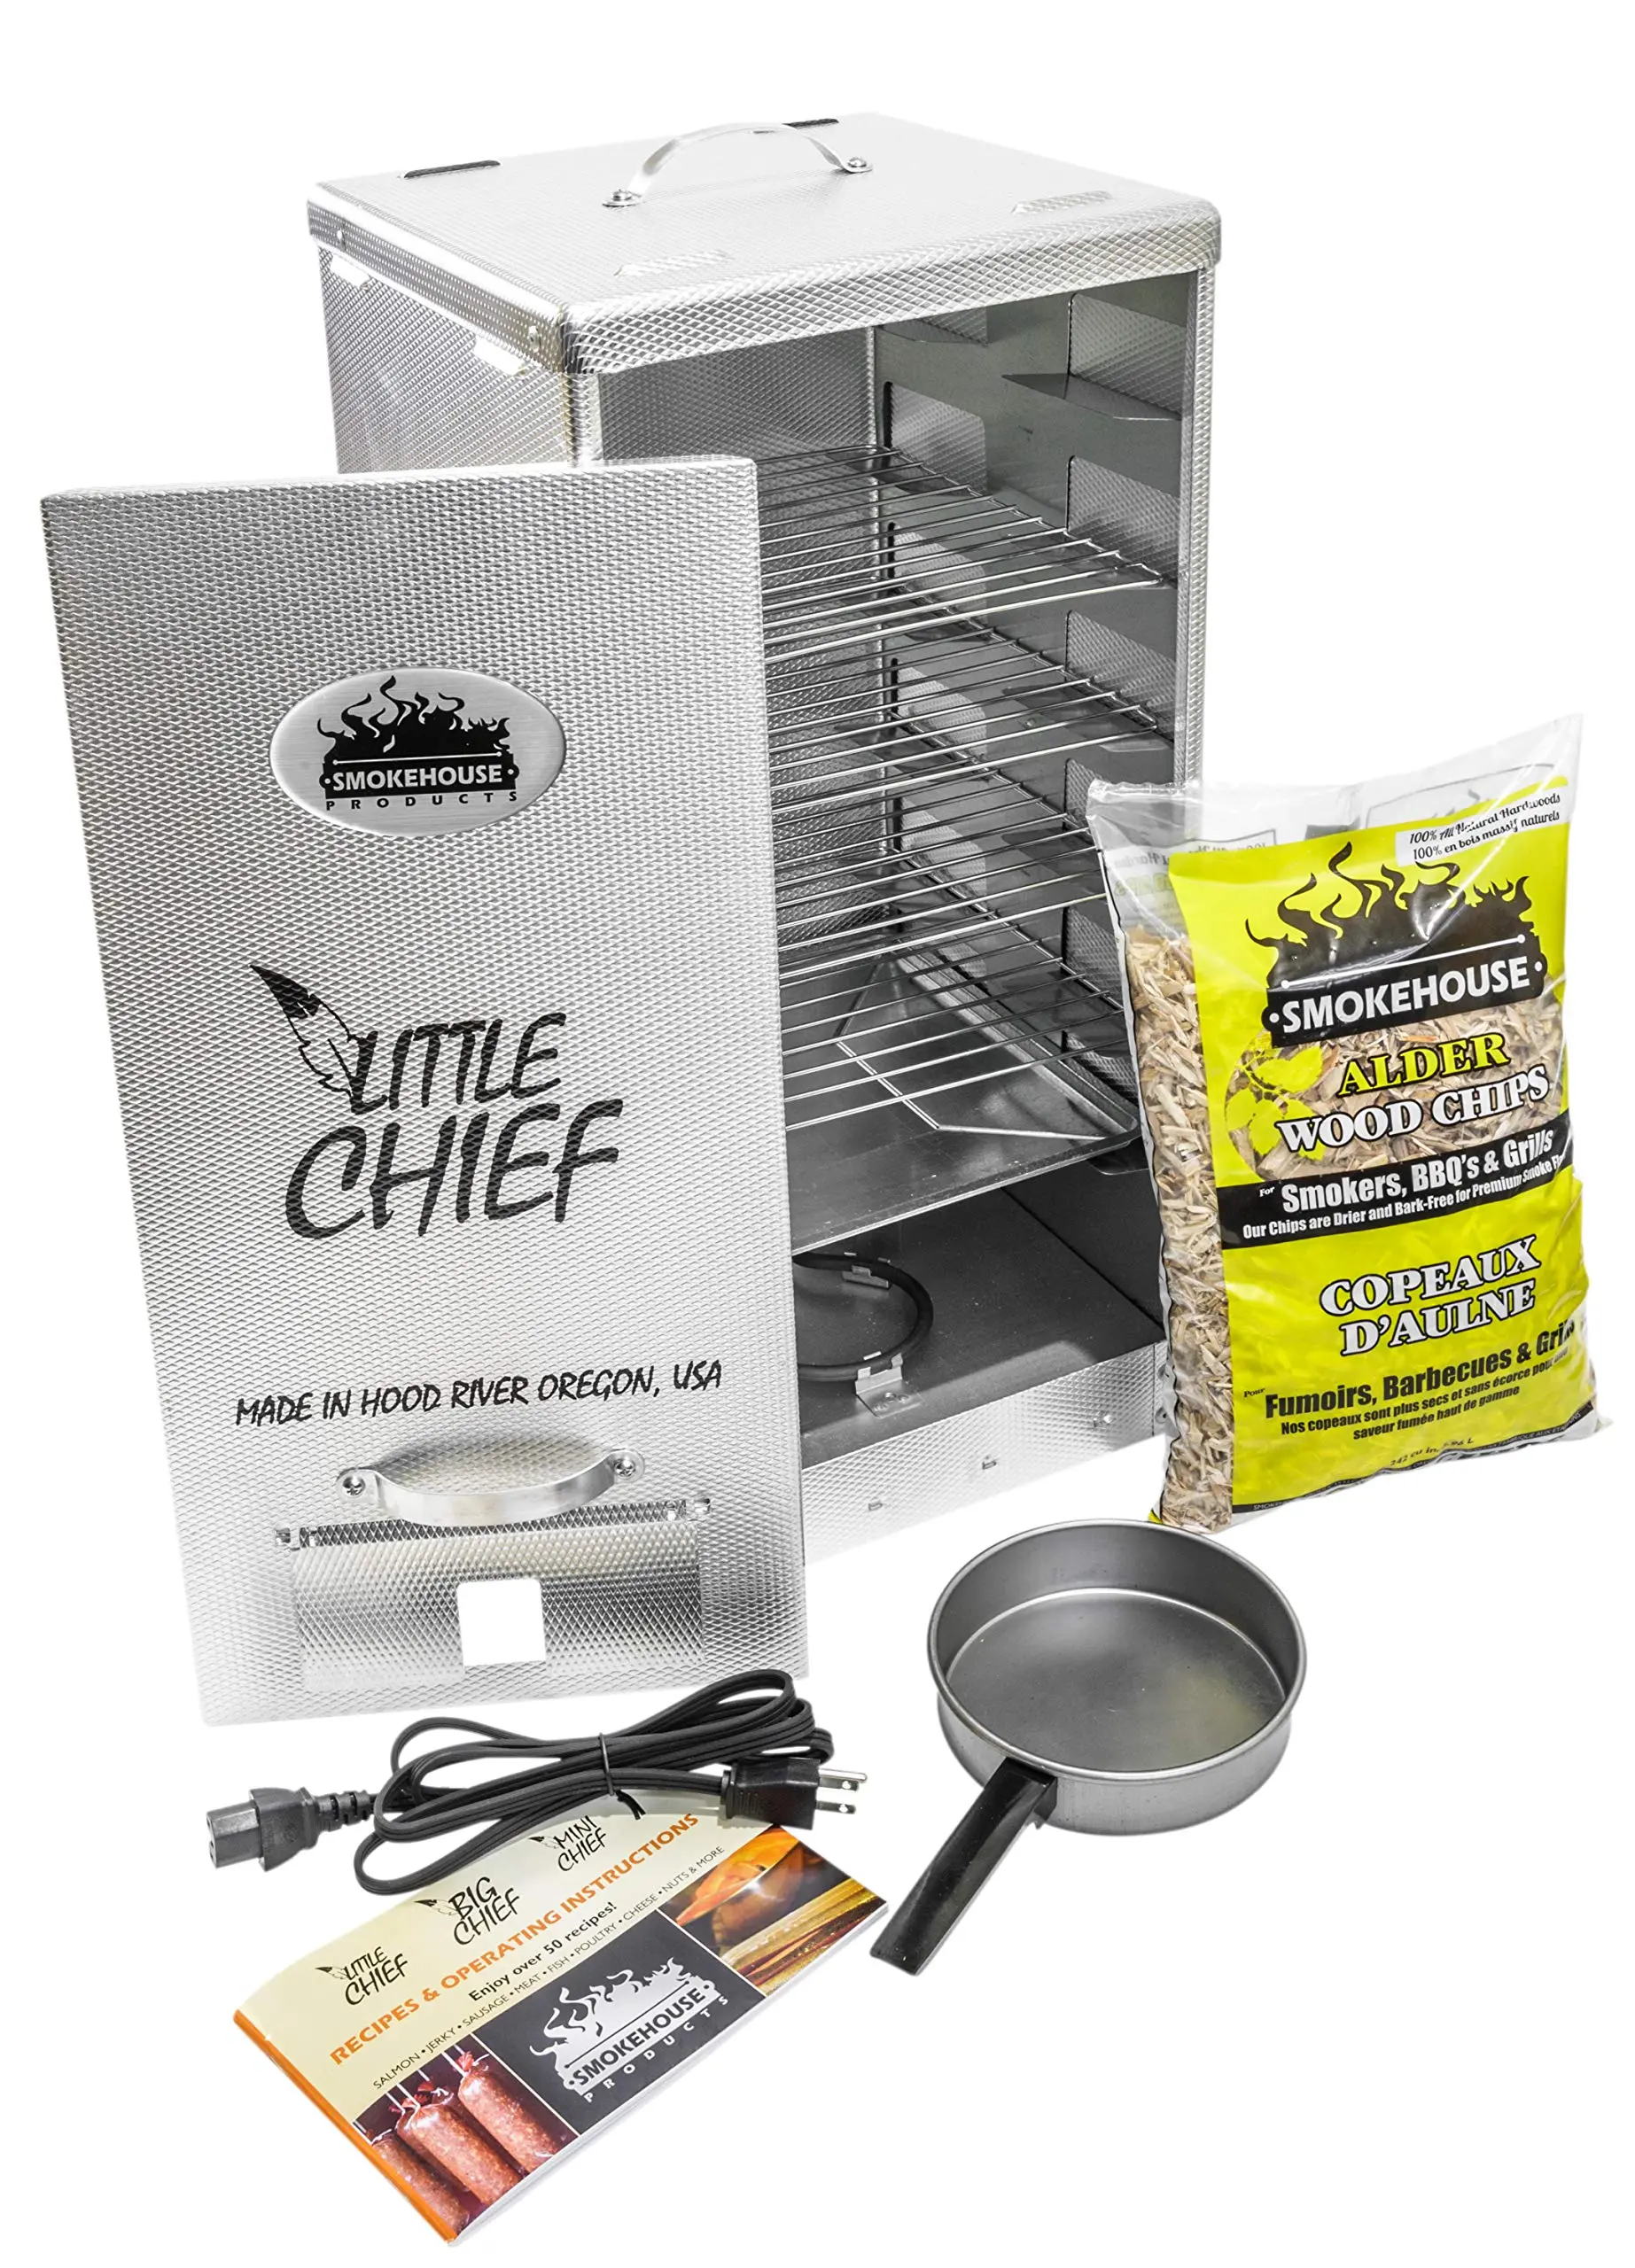 smokehouse chief front load smoker - Does the Big Chief smoker cook food